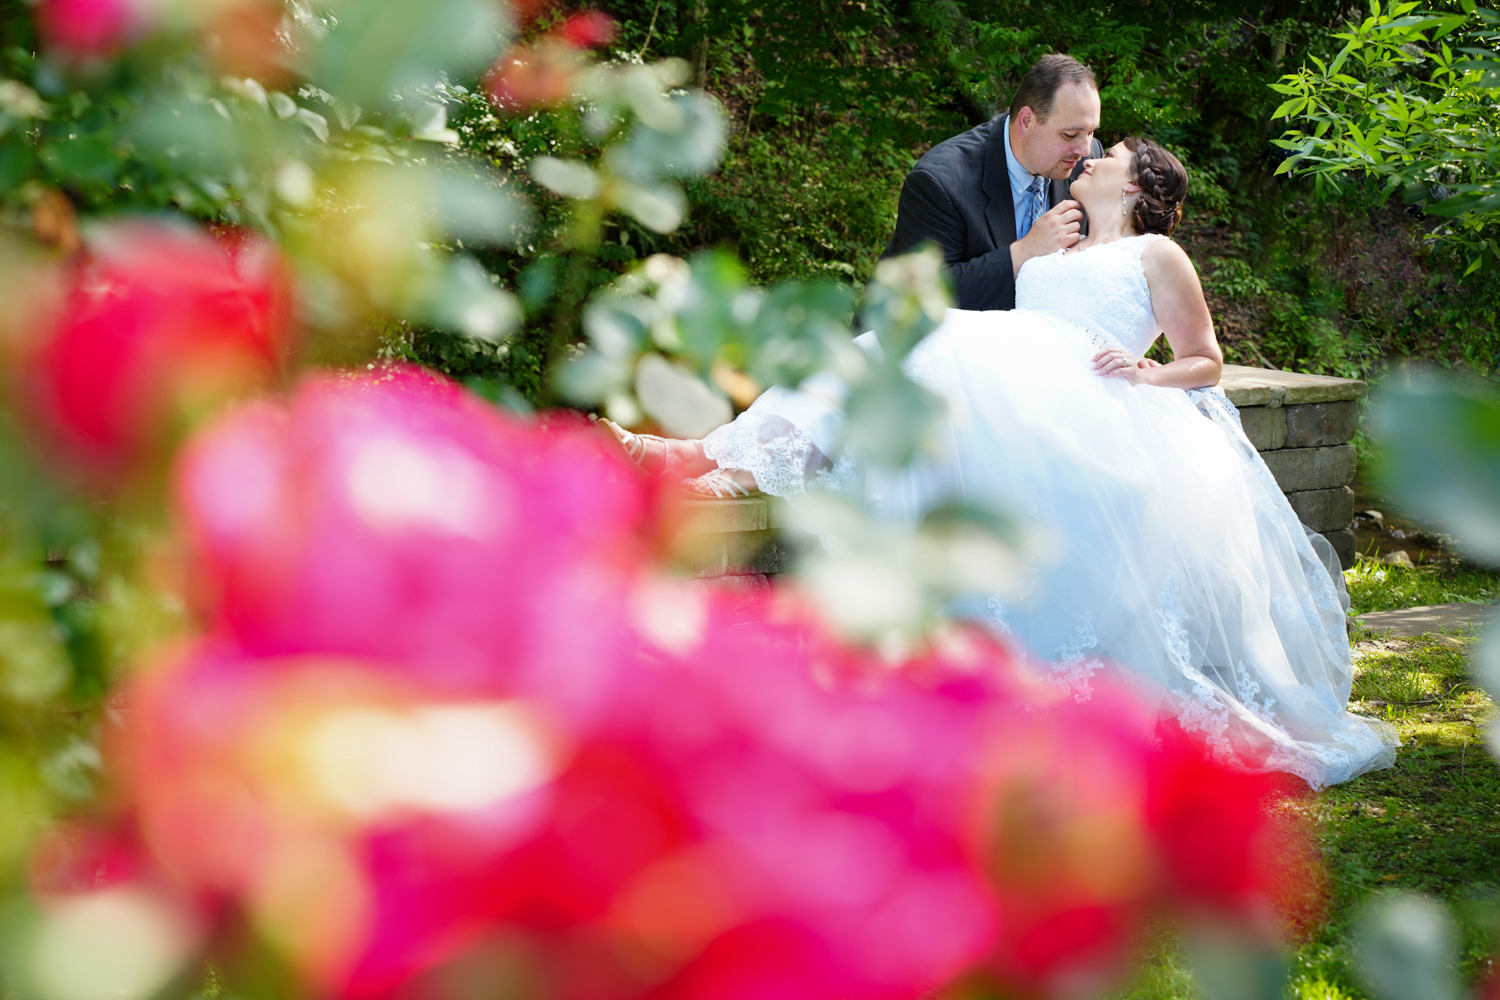 Groom passionately kissing his bride on a rock while behind red roses